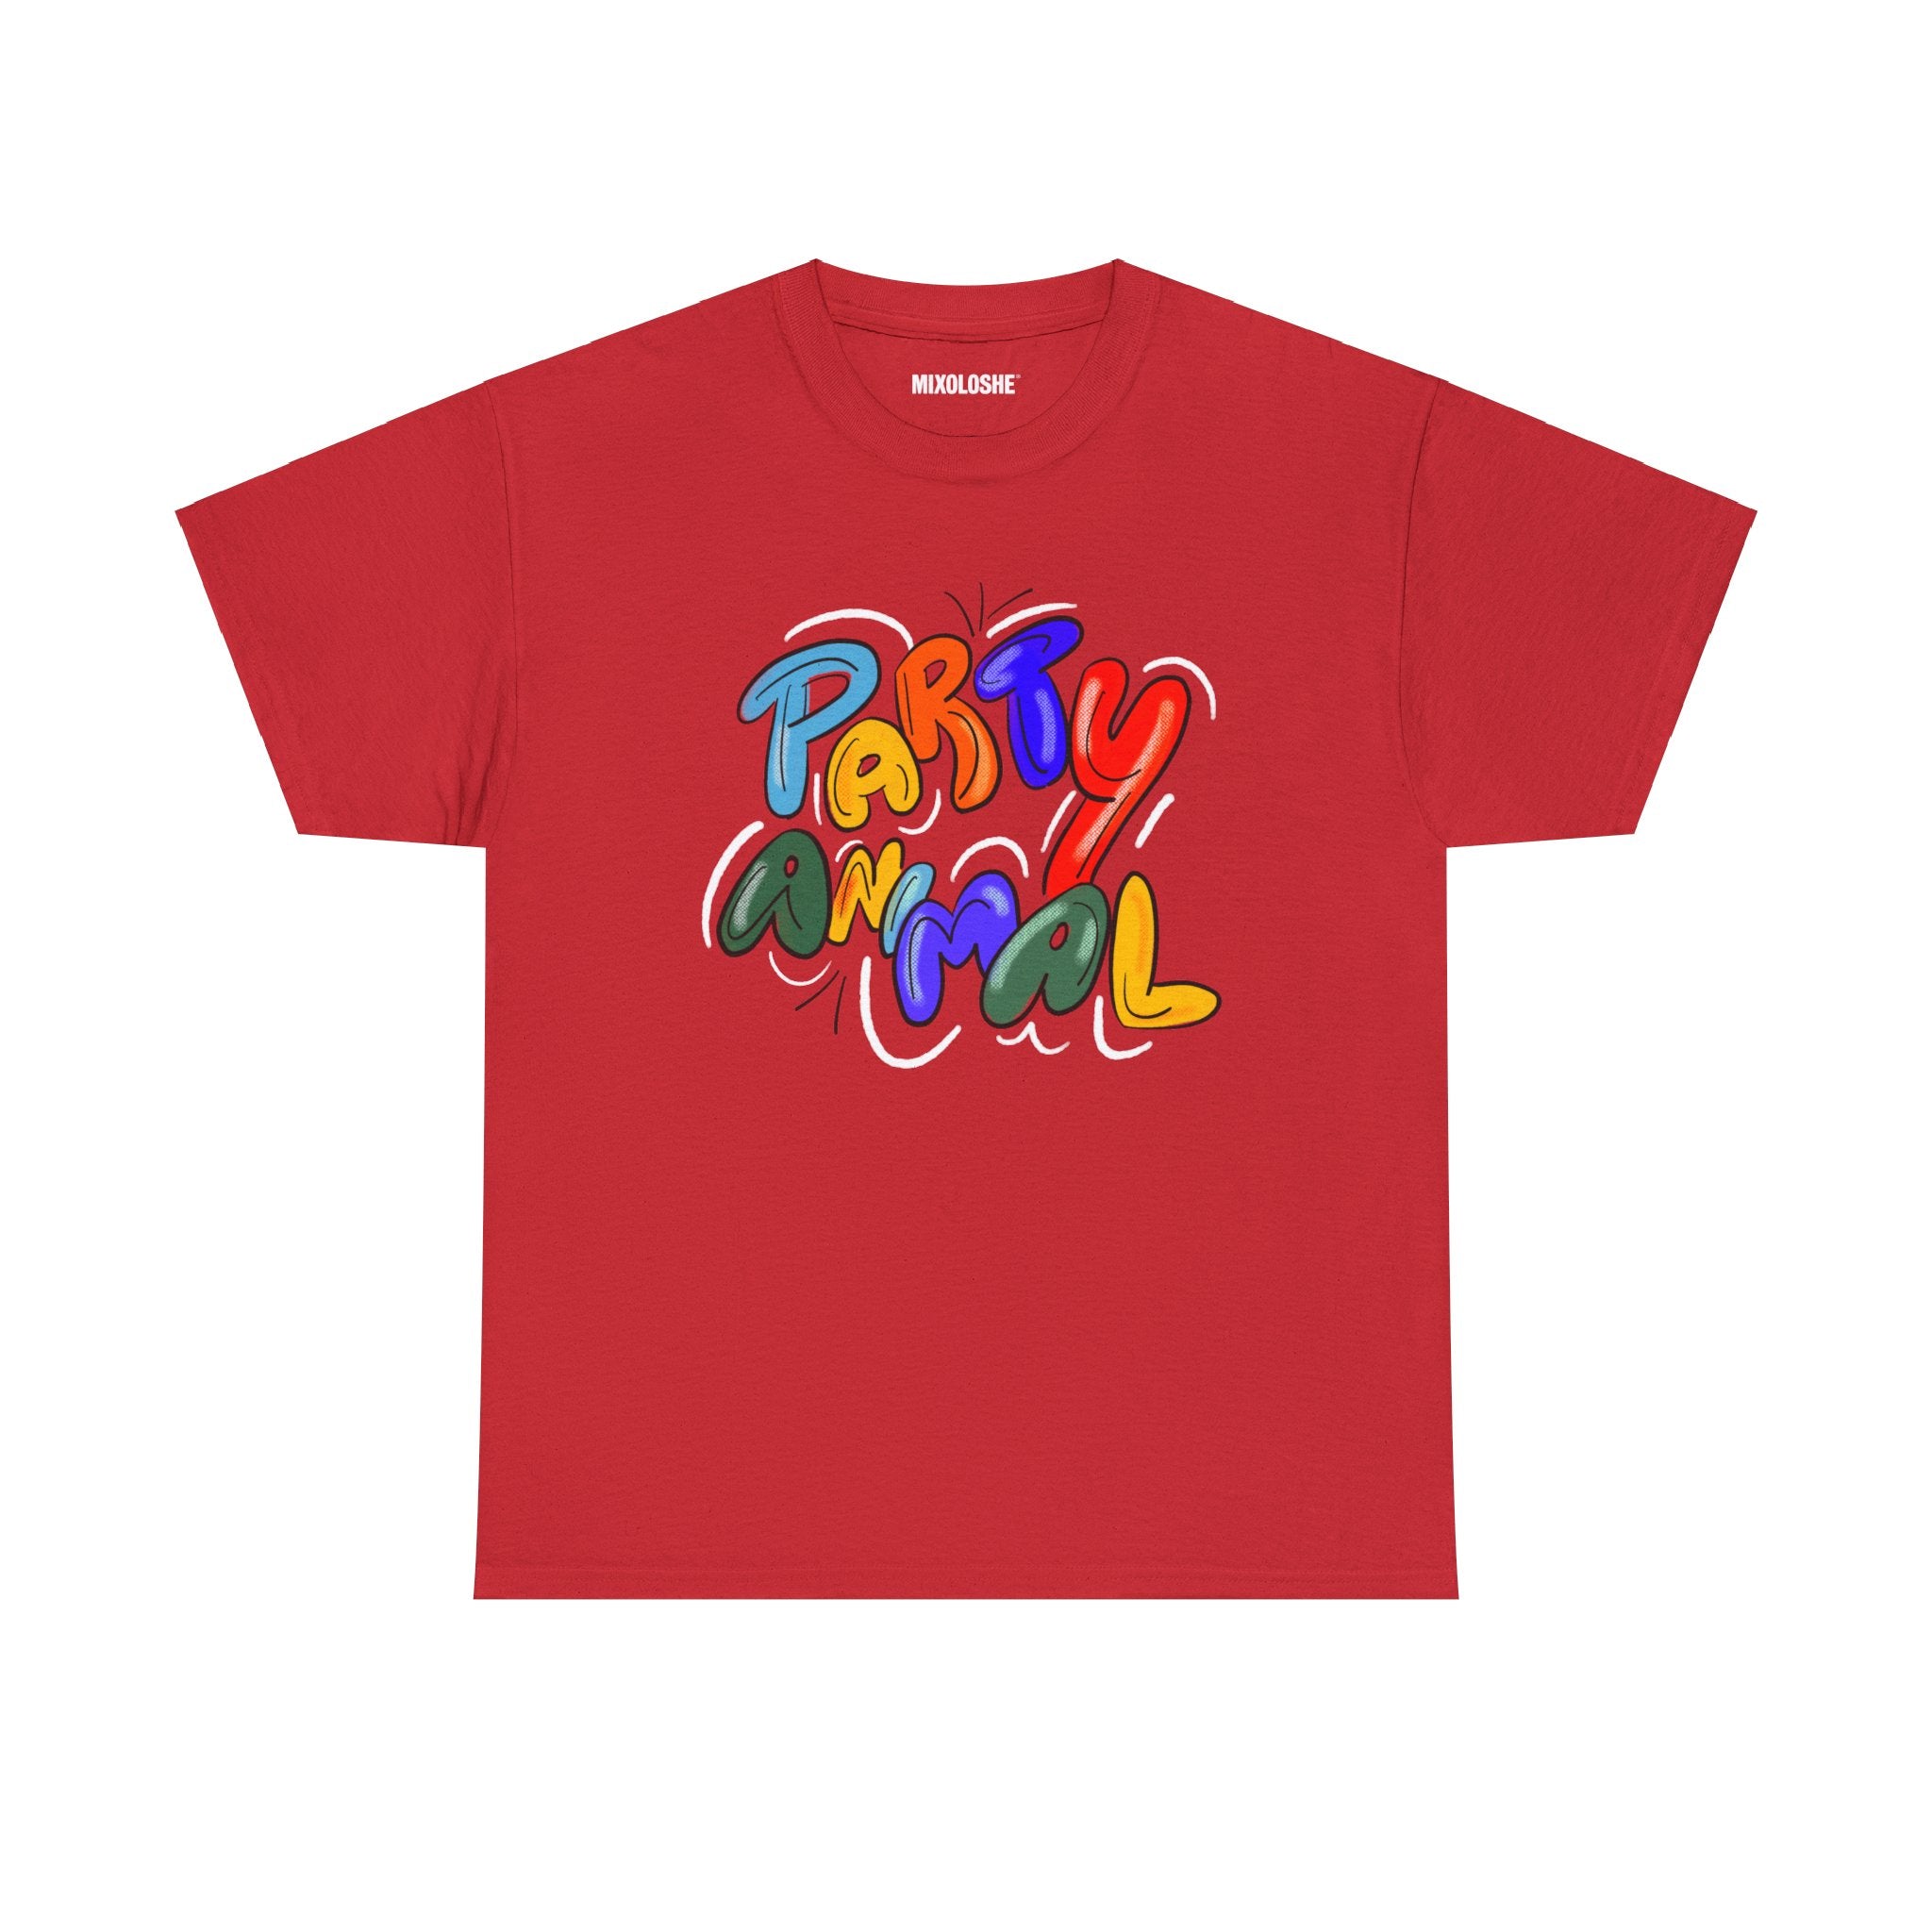 Party Animal Tee